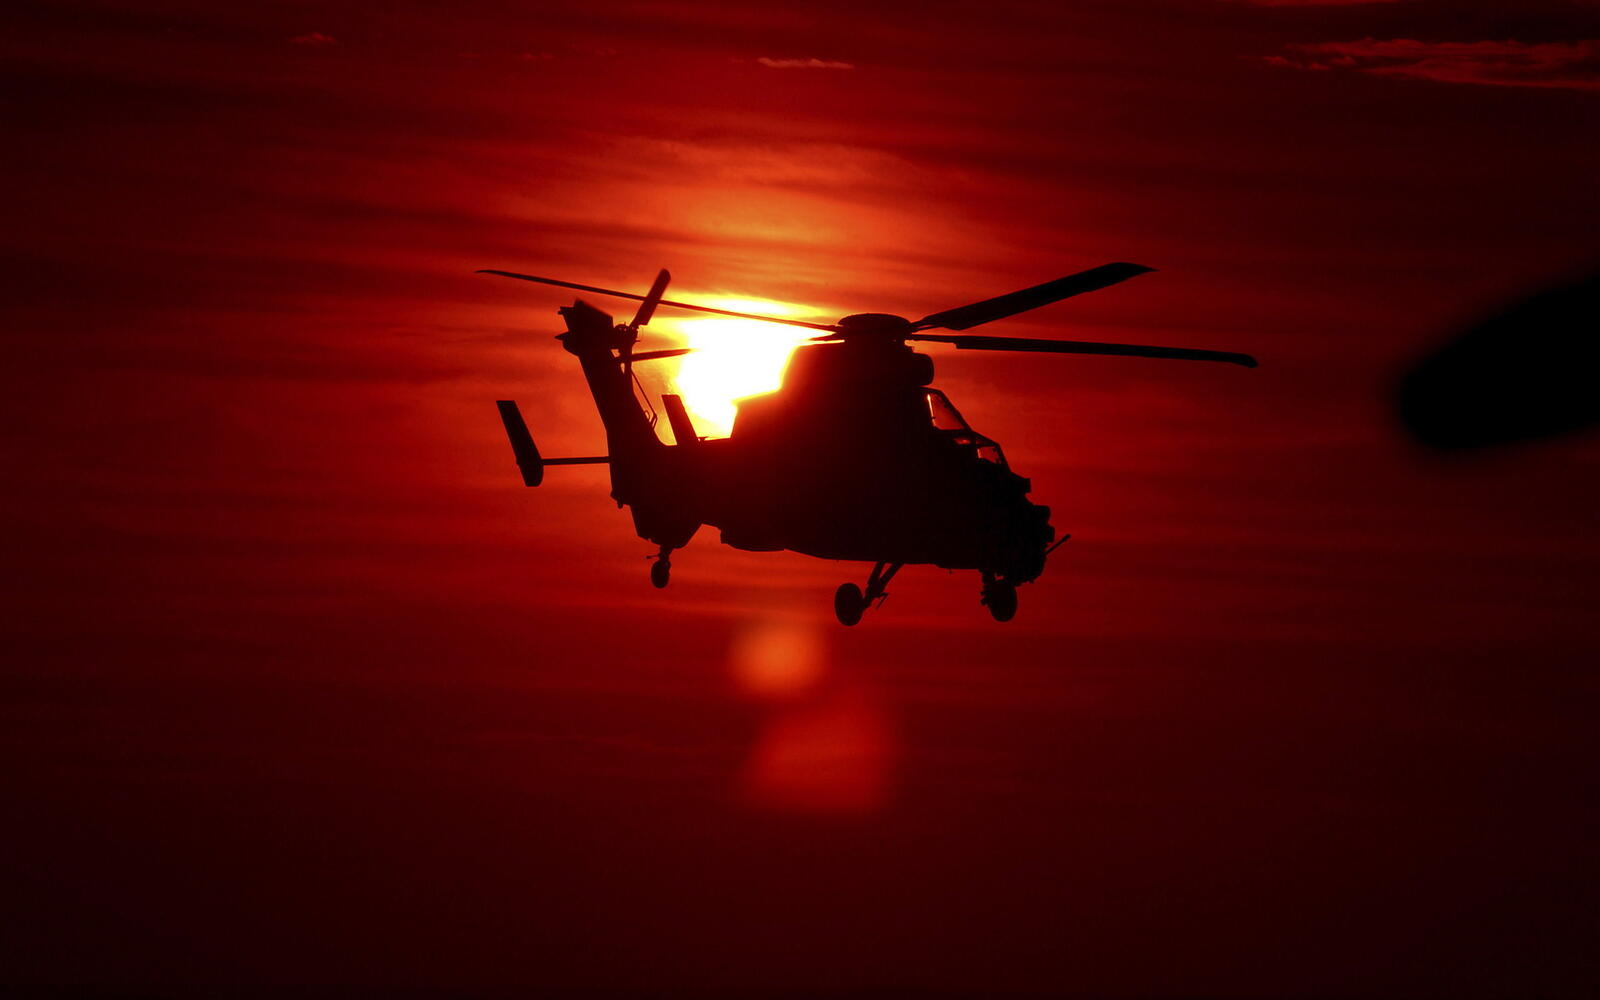 Wallpapers helicopter sunset sun on the desktop